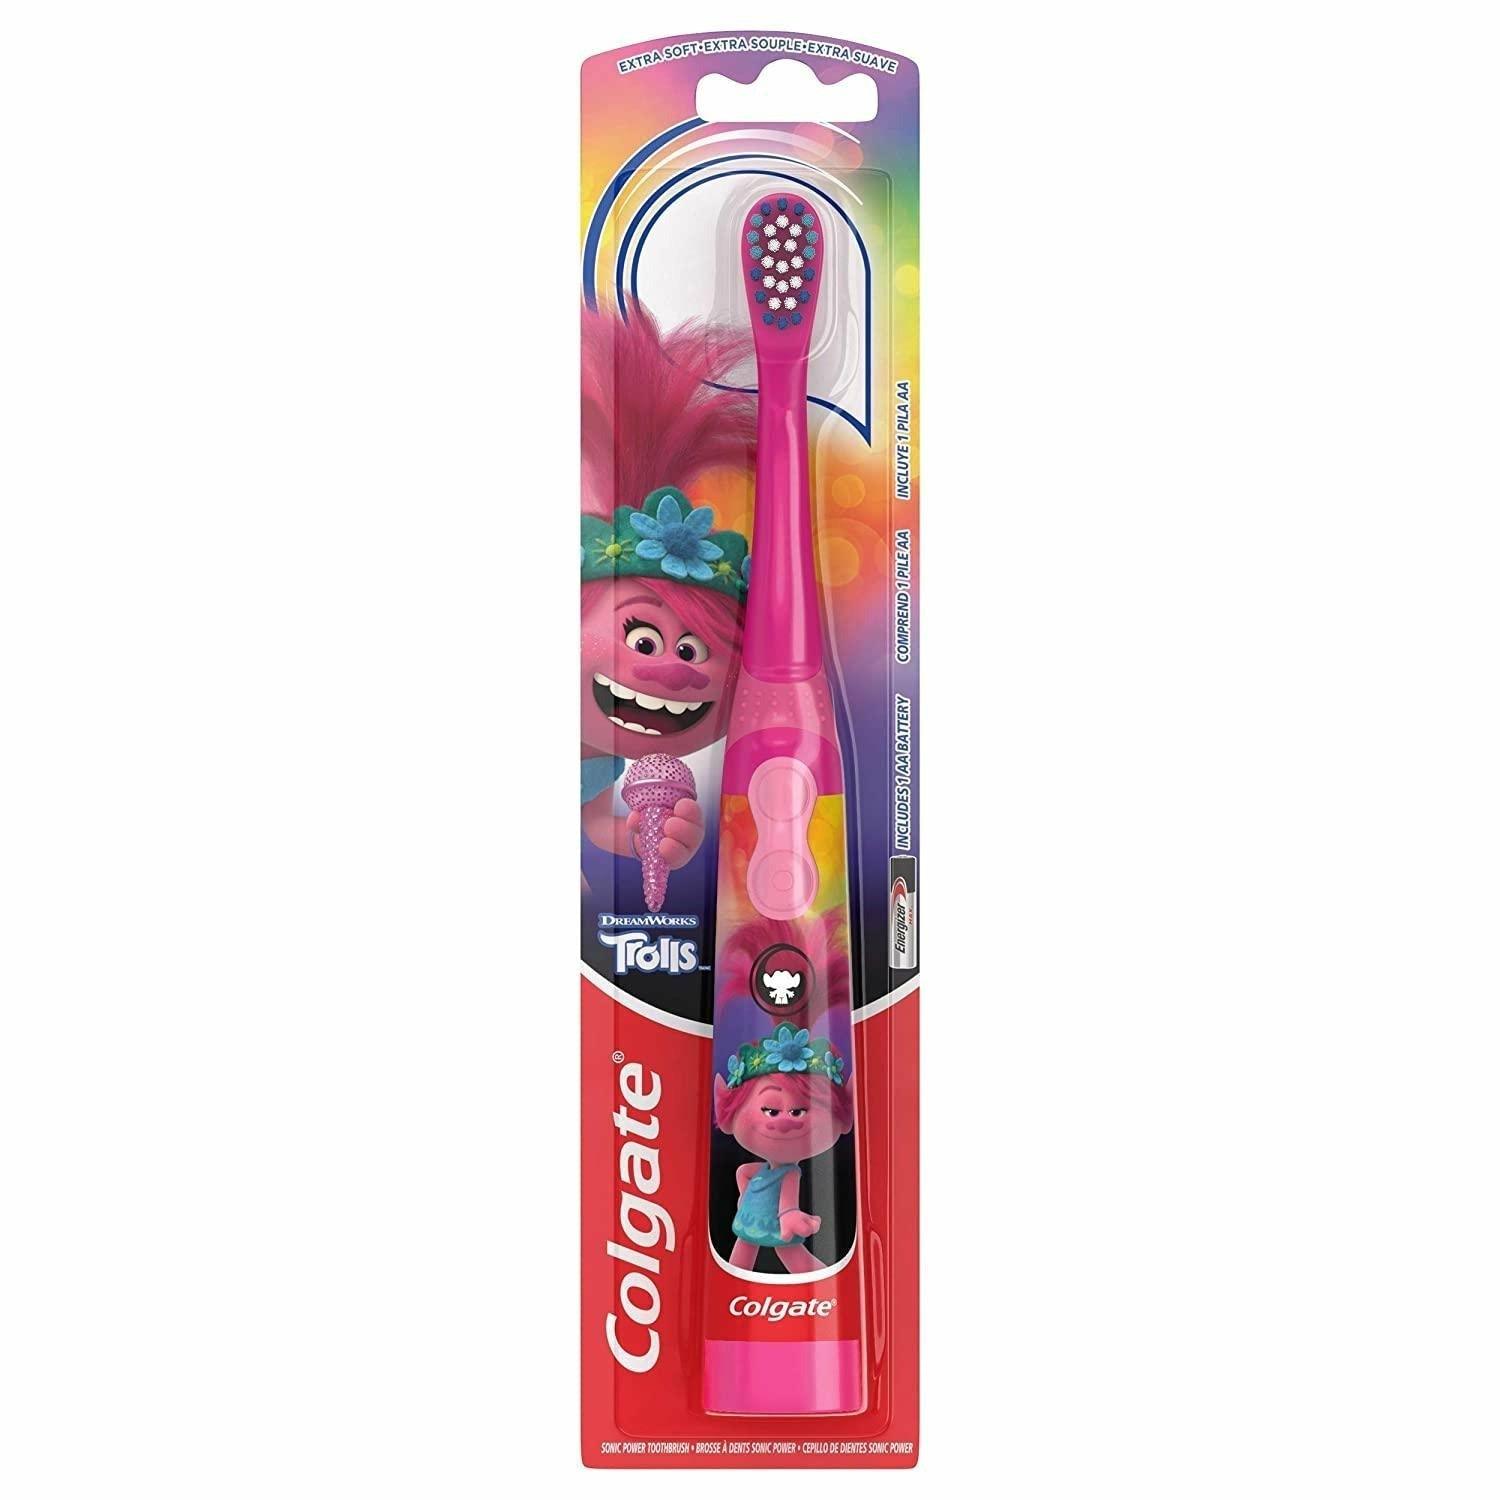 Colgate Kids Electric Battery Powered Toothbrush - Trolls - BumbleToys - 5-7 Years, Baby Saftey & Health, Toothbrush, Trolls